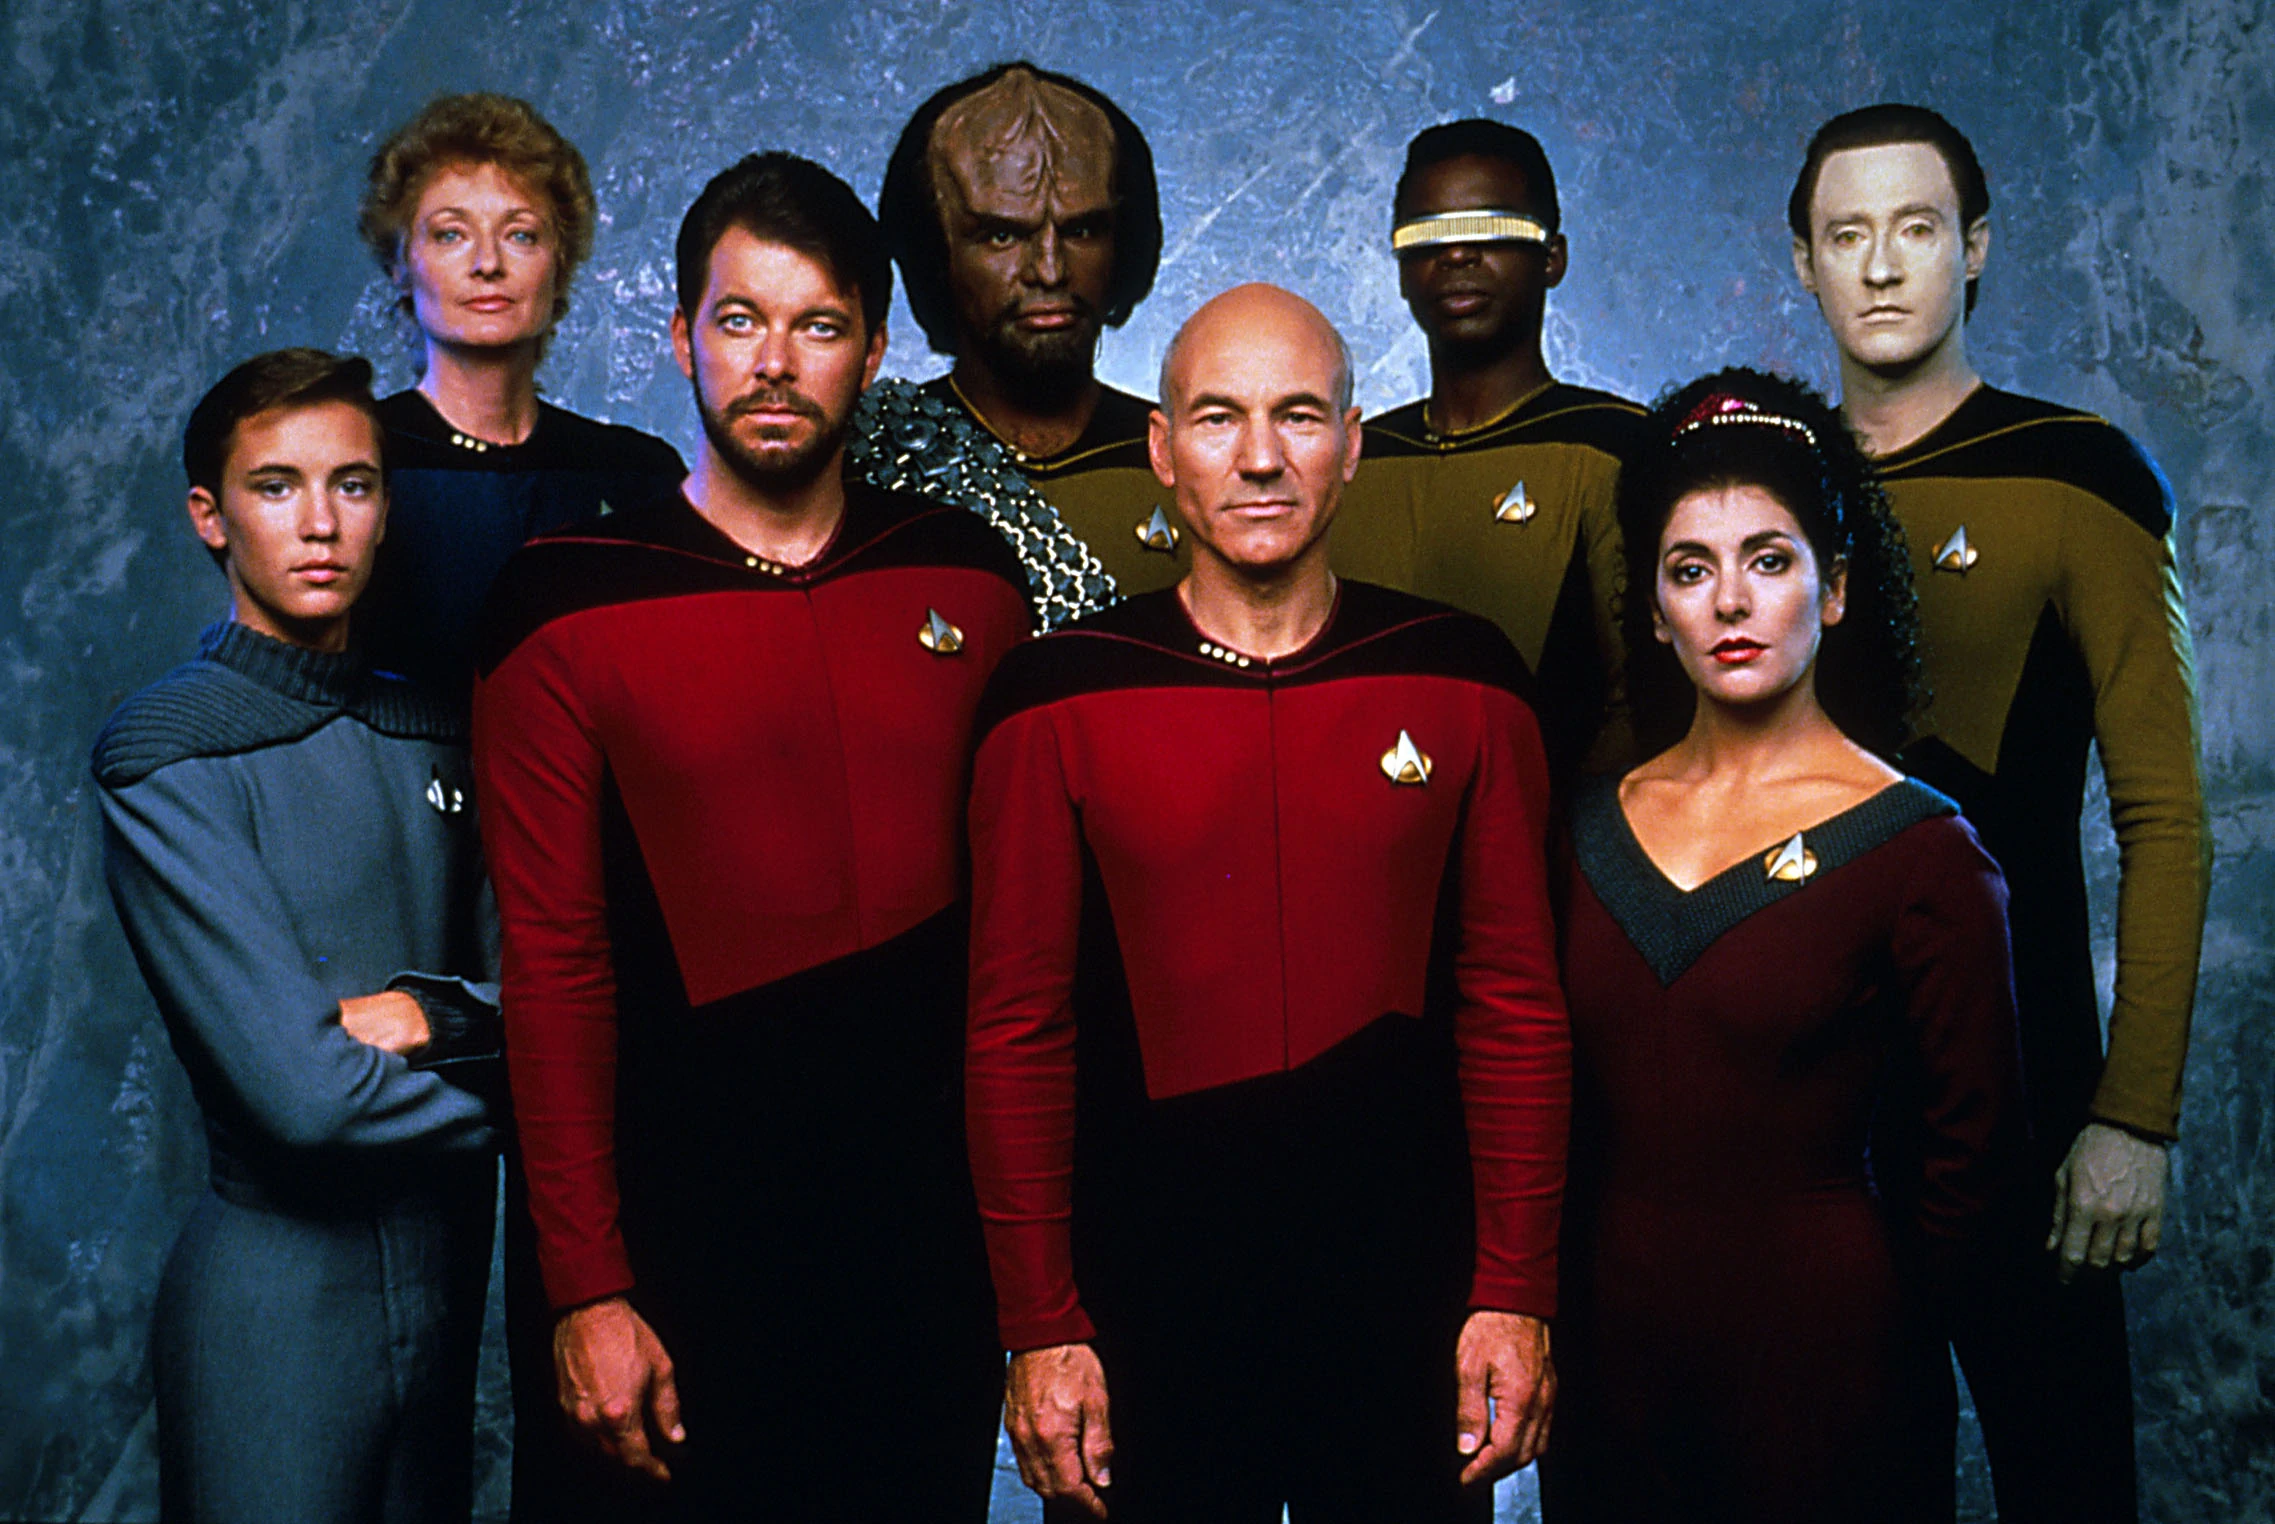 Why Were The Star Trek The Next Generation Uniforms So Uncomfortable